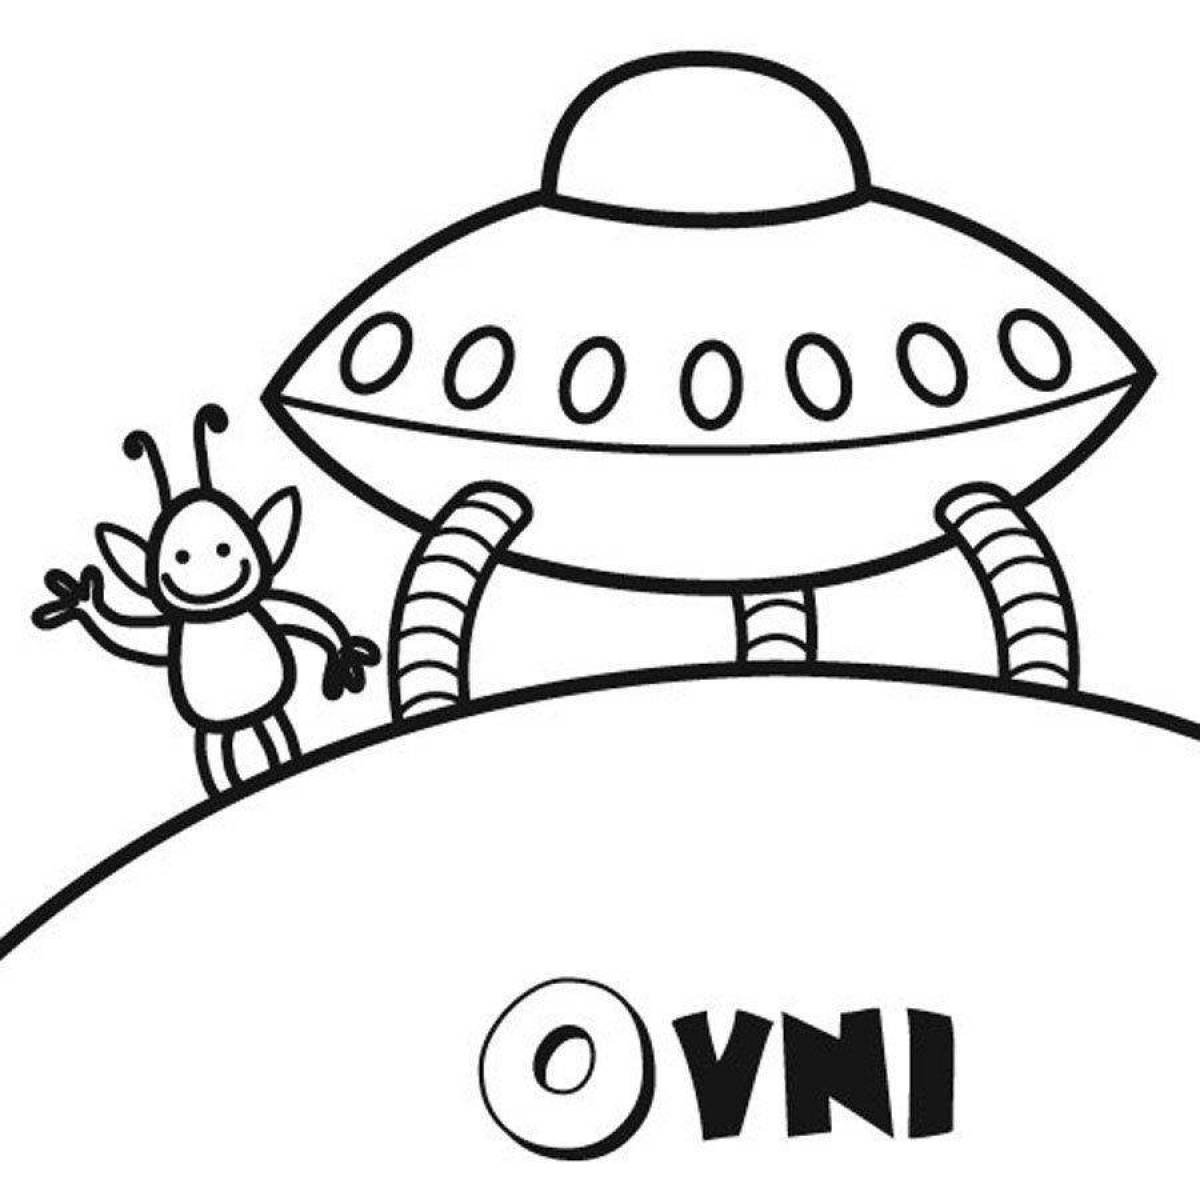 Playful flying saucer coloring page